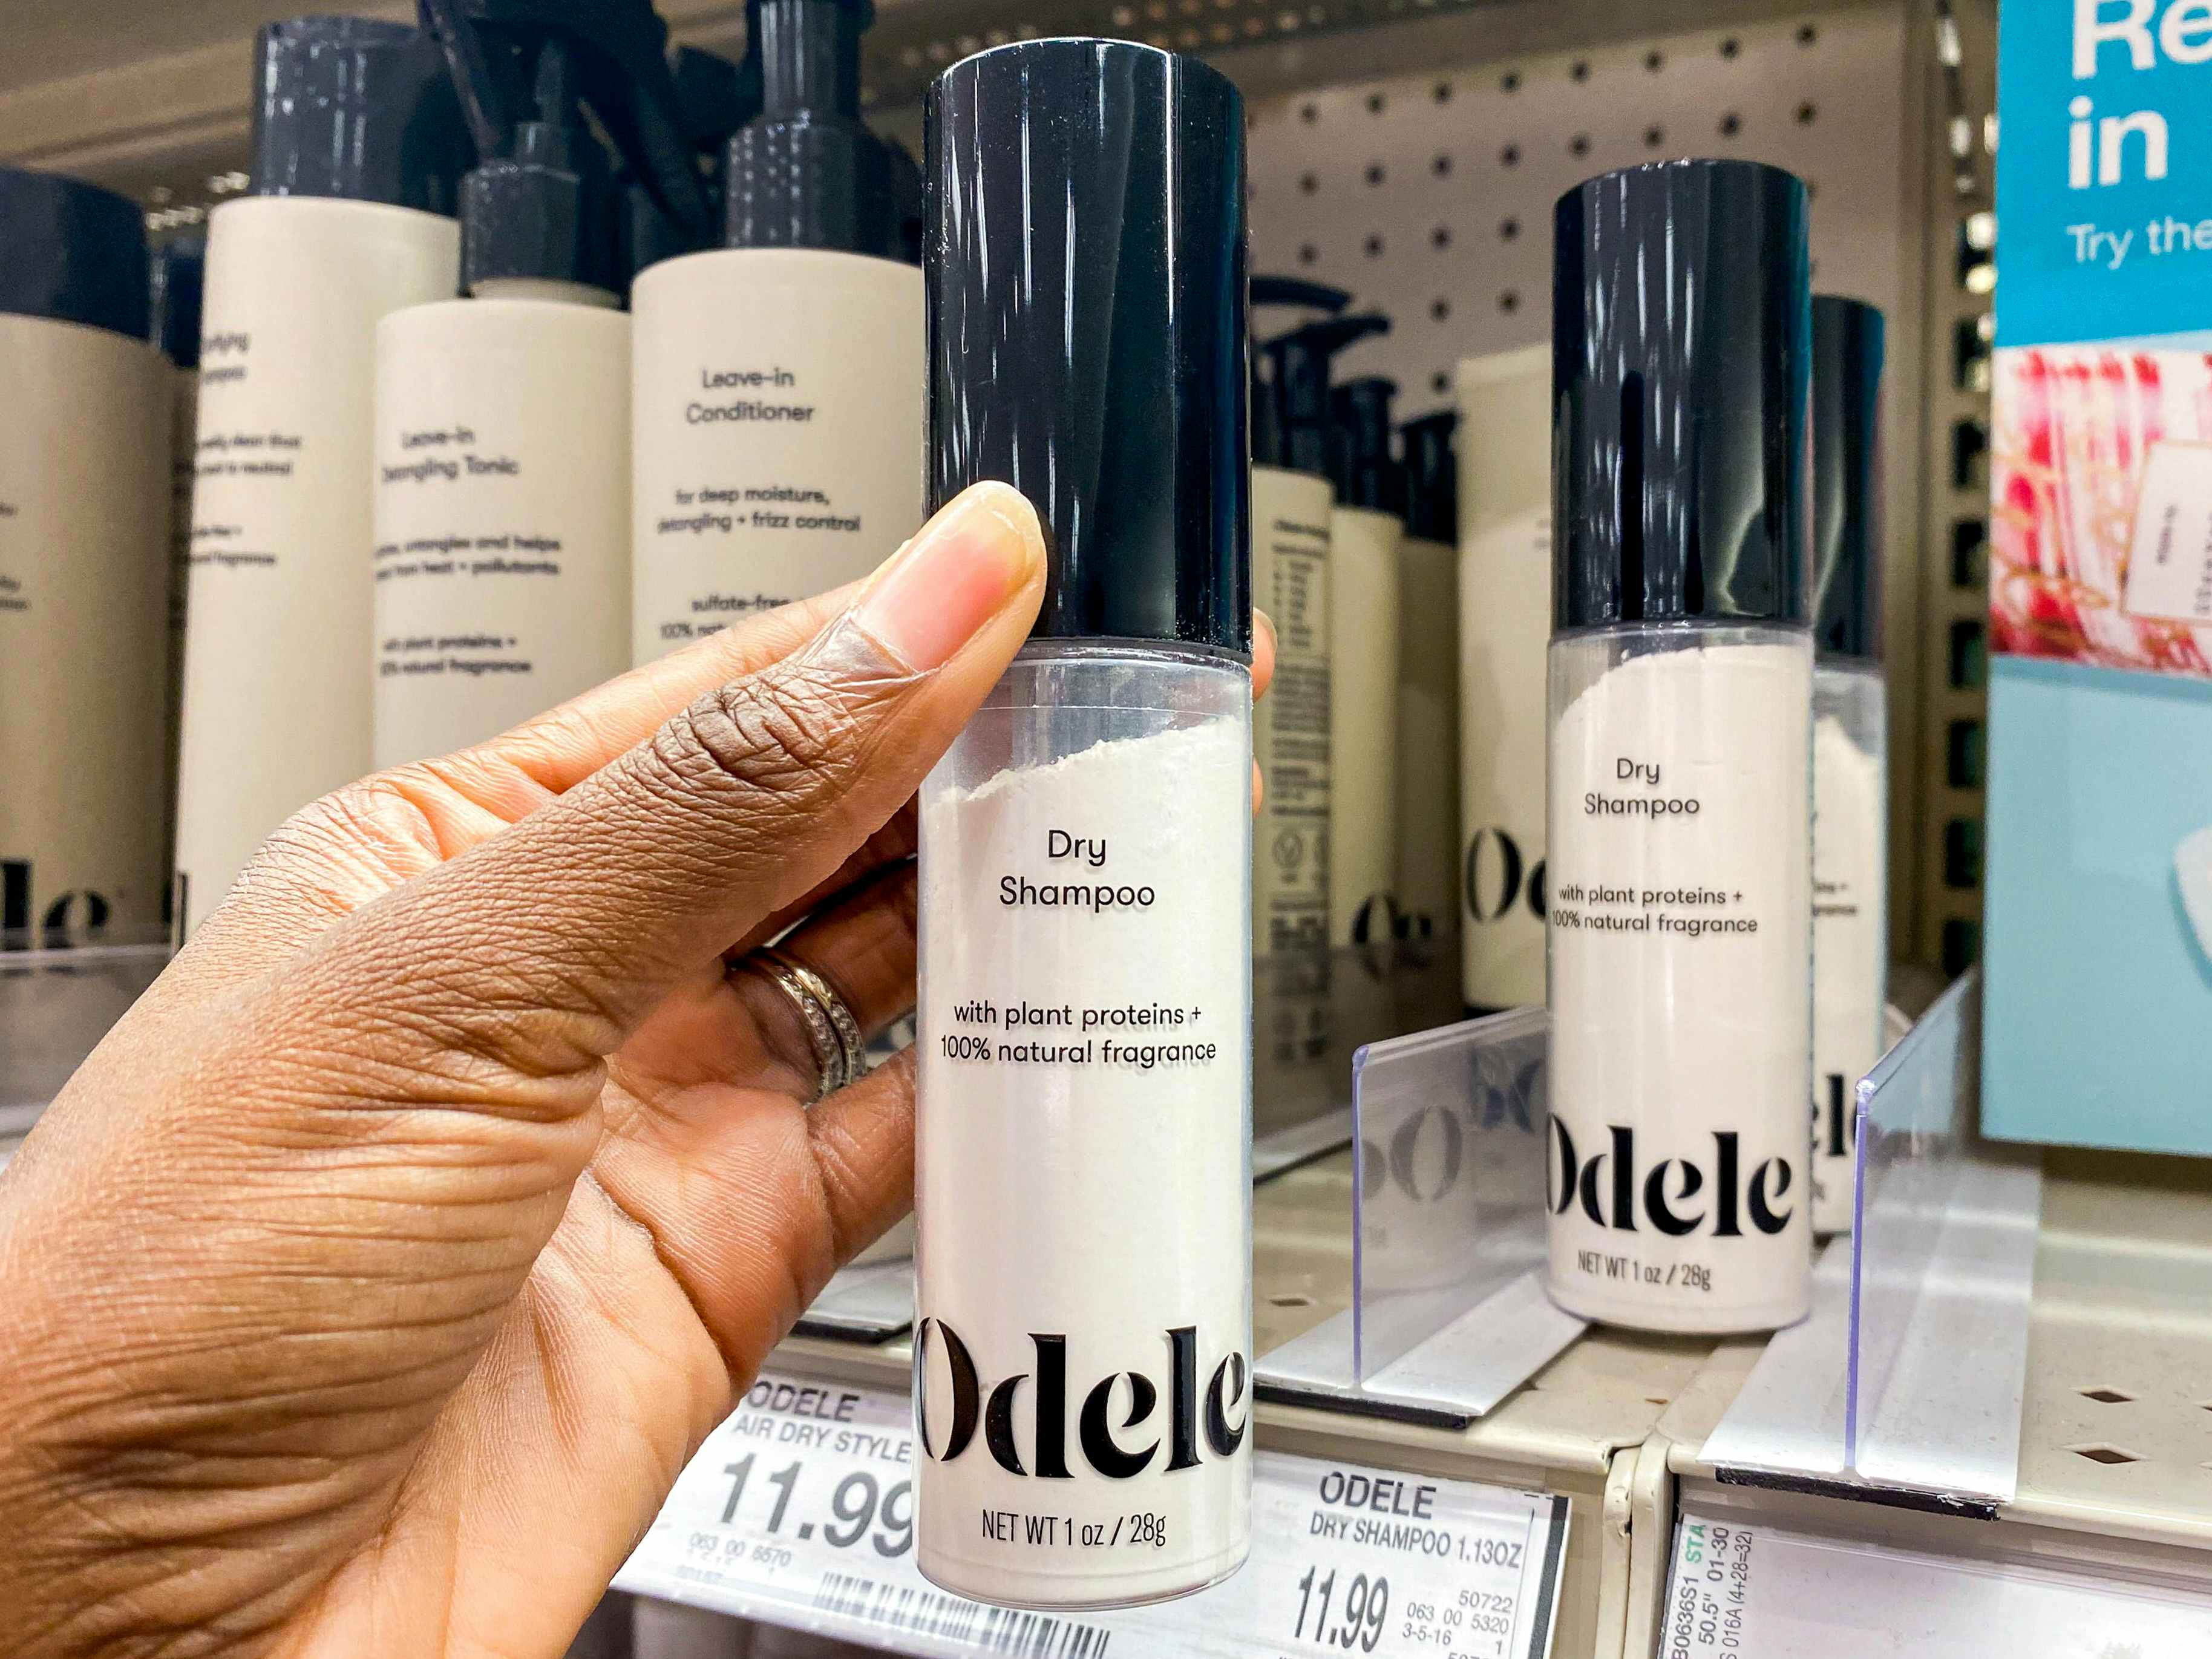 A person's hand taking a bottle of Odele Dry Shampoo from a shelf at Target.